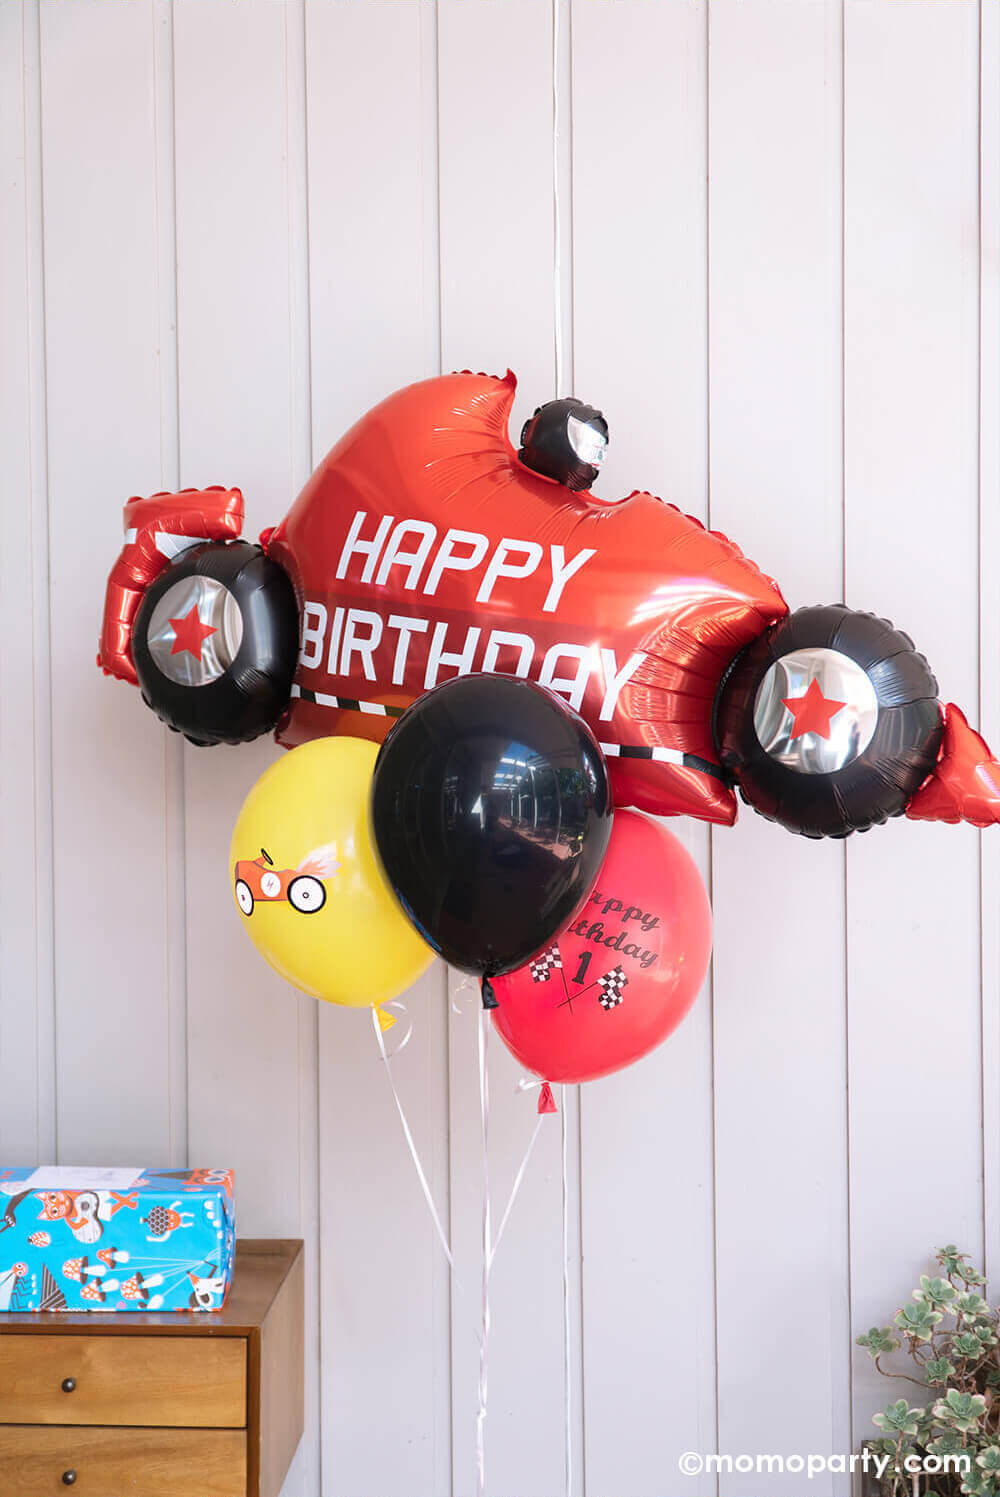 Race Car themed birthday Party corner a wrapped gift next to a Betallic Balloon 43 inch Race Car Birthday Foil Balloon and Vintage Race Car Latex Balloon Mix balloon boutique. Accent your little one's race car birthday party with this awesome car shaped foil mylar balloon with with "happy birthday" text print, and a vintage car print on a yellow latex balloon and a race car flag and "happy birthday" text on a red latex balloon